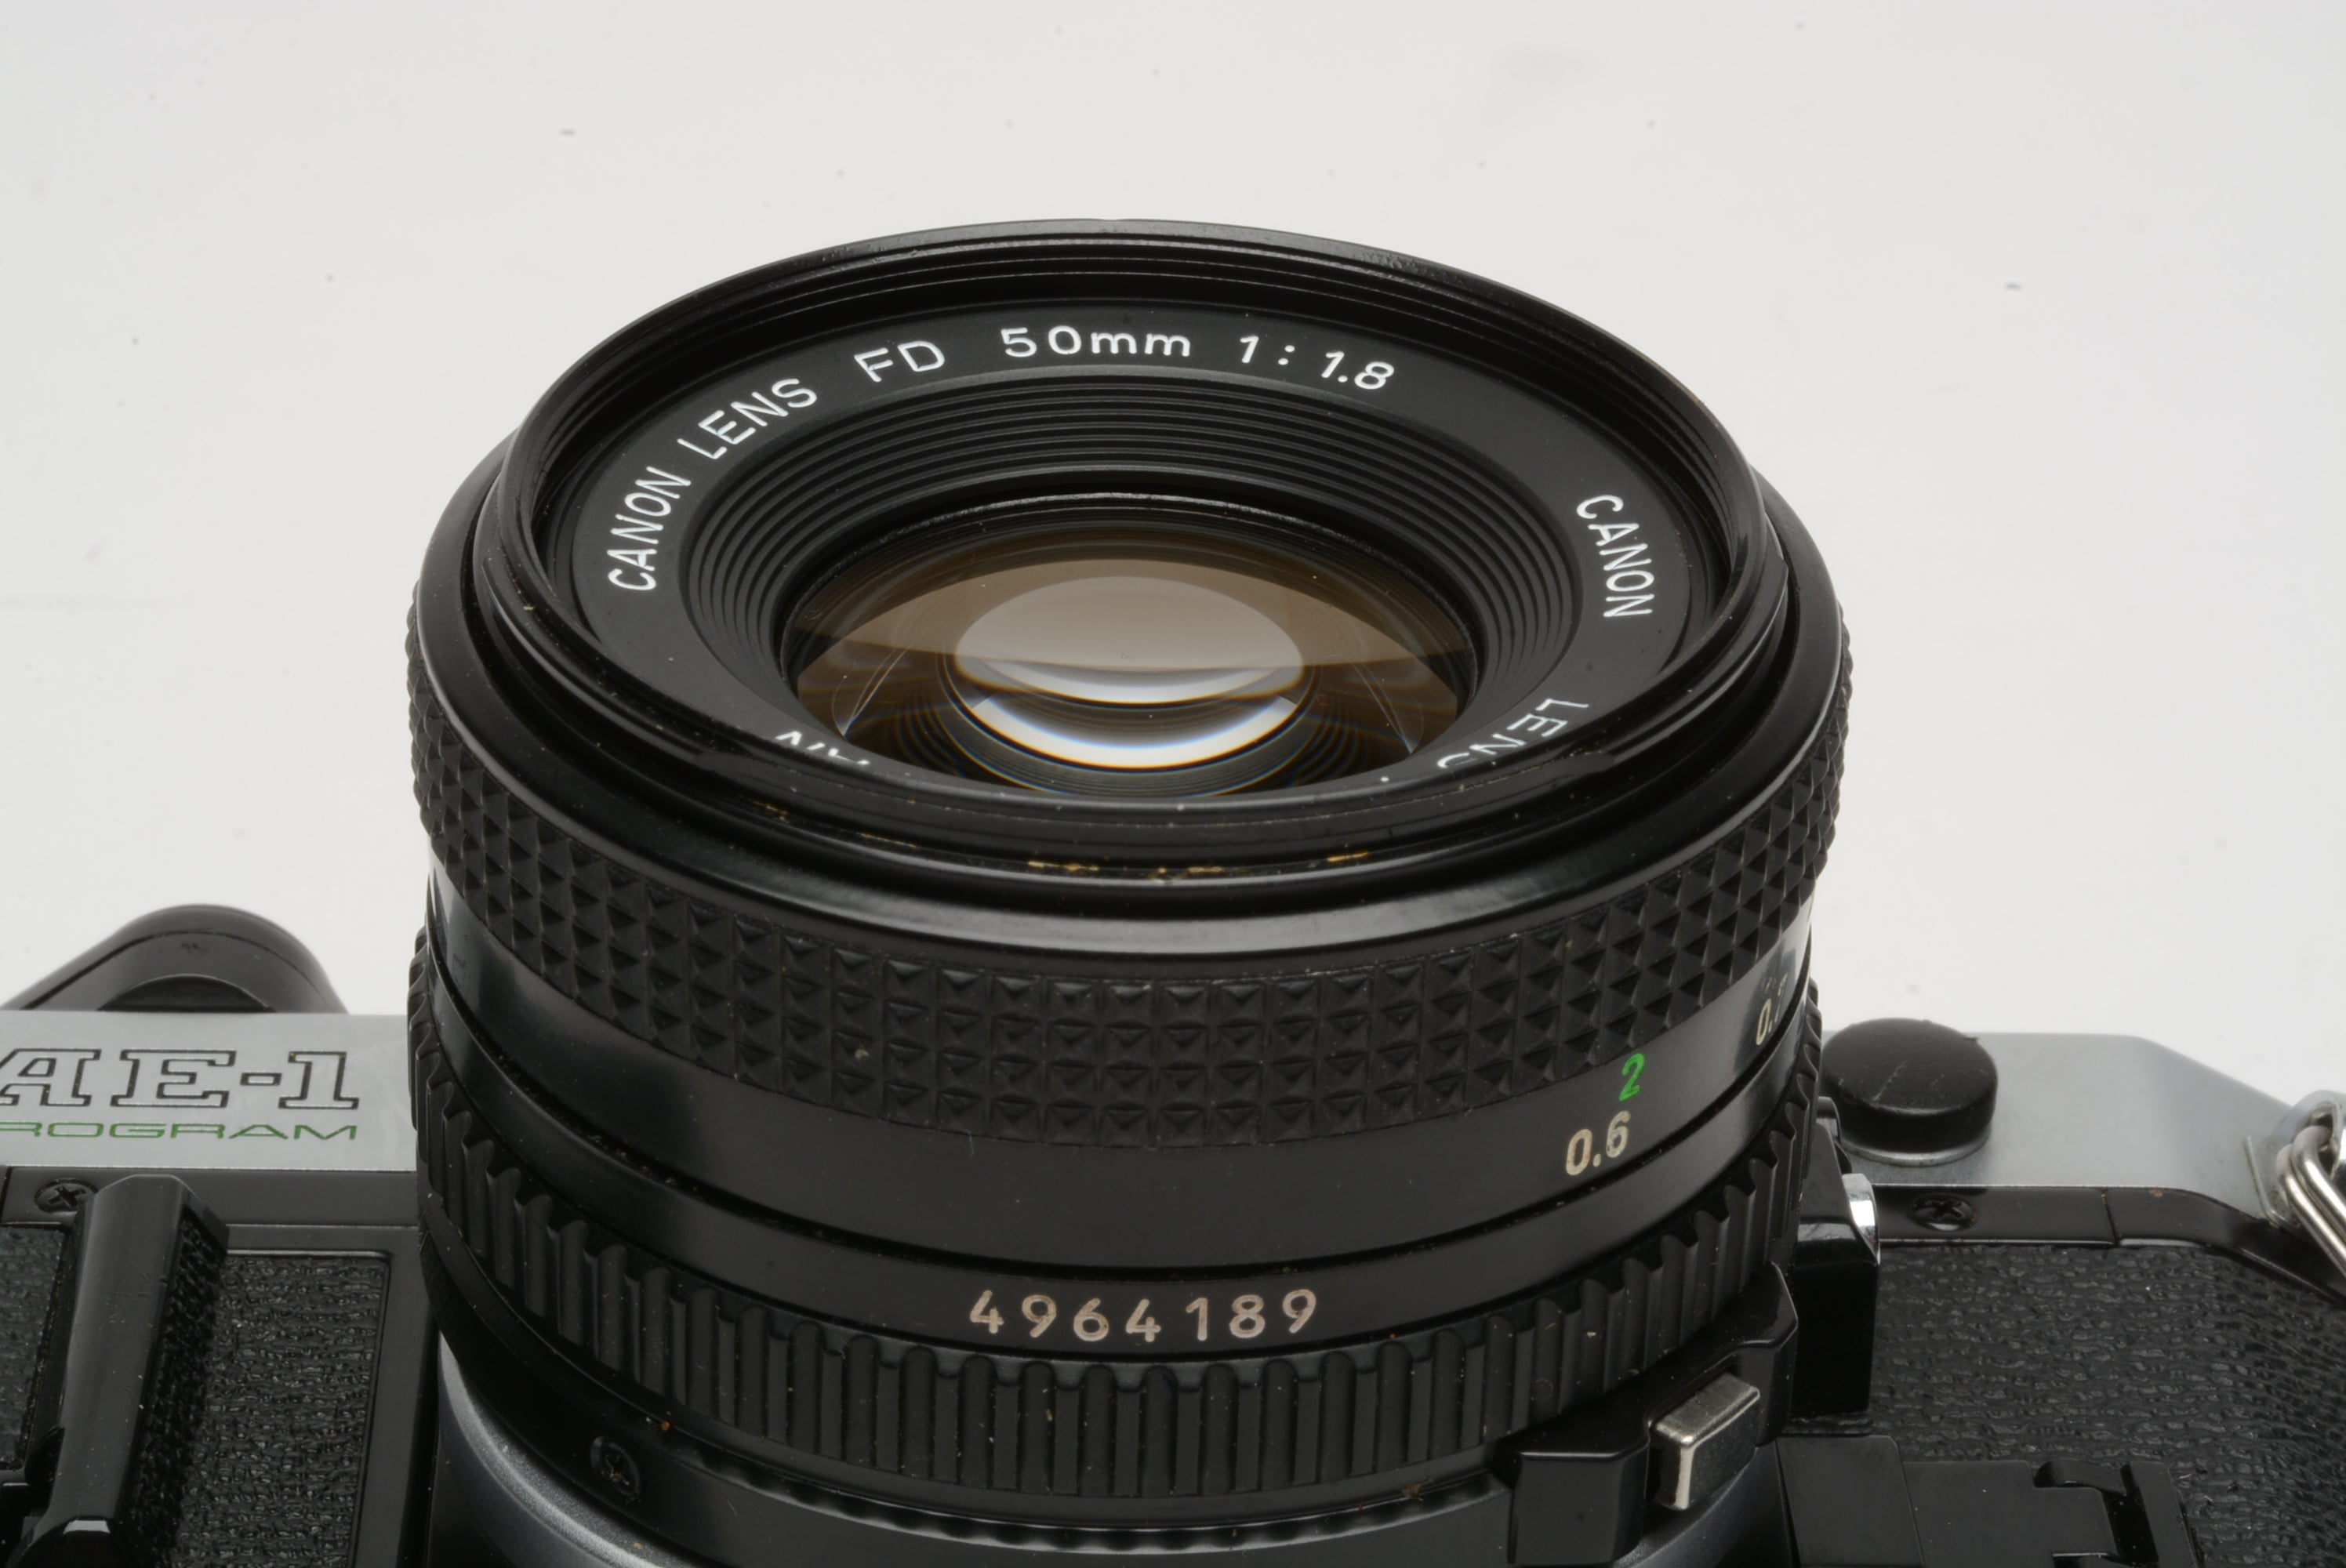 Contax S-Planar 60mm f2.8 AEG T* lens for Contax/Yashica mount, caps